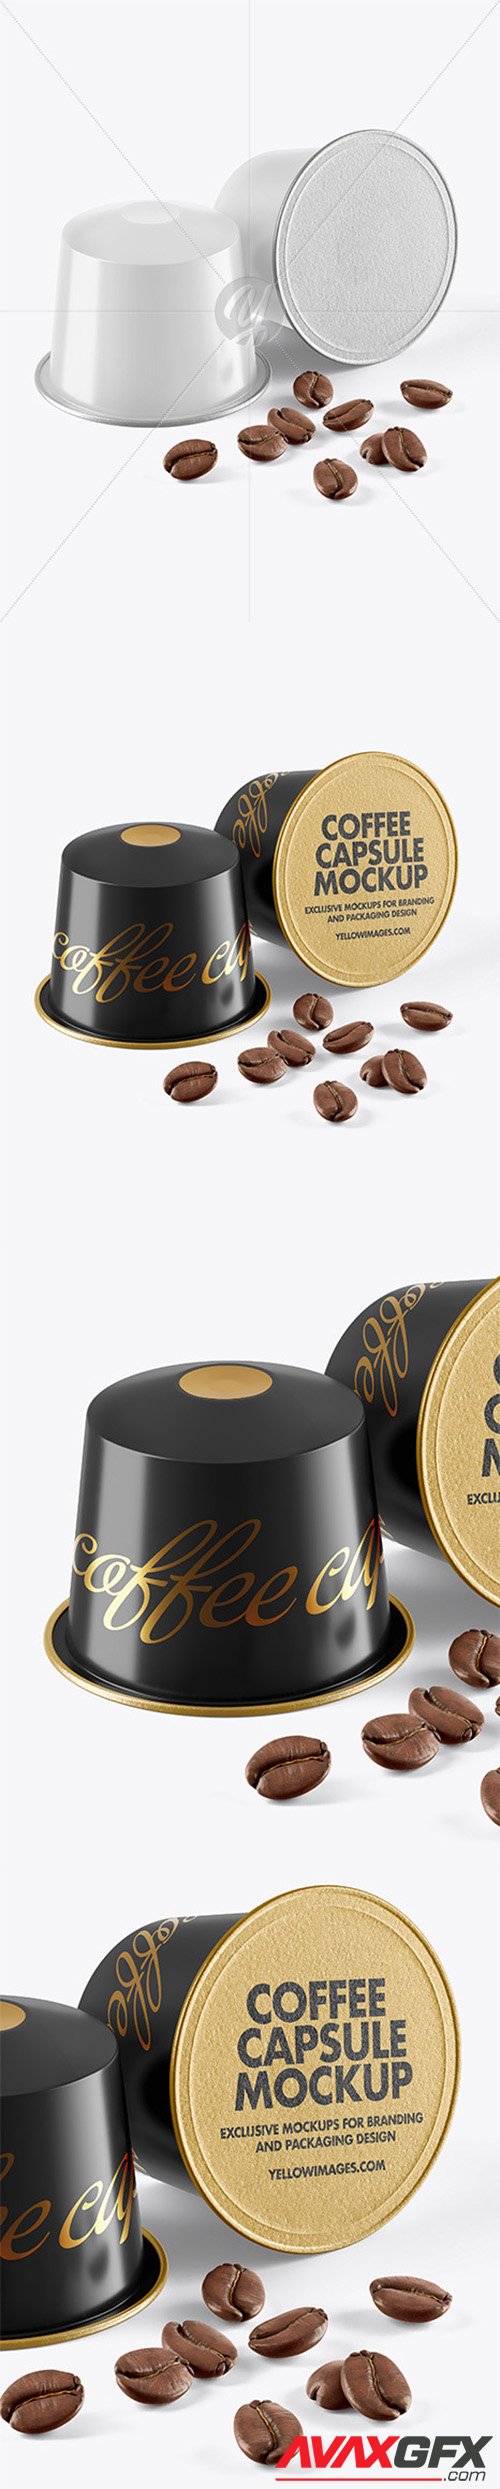 Download Coffee Capsule With Coffee Splash And Beans Mockup 59442 Avaxgfx All Downloads That You Need In One Place Graphic From Nitroflare Rapidgator Yellowimages Mockups